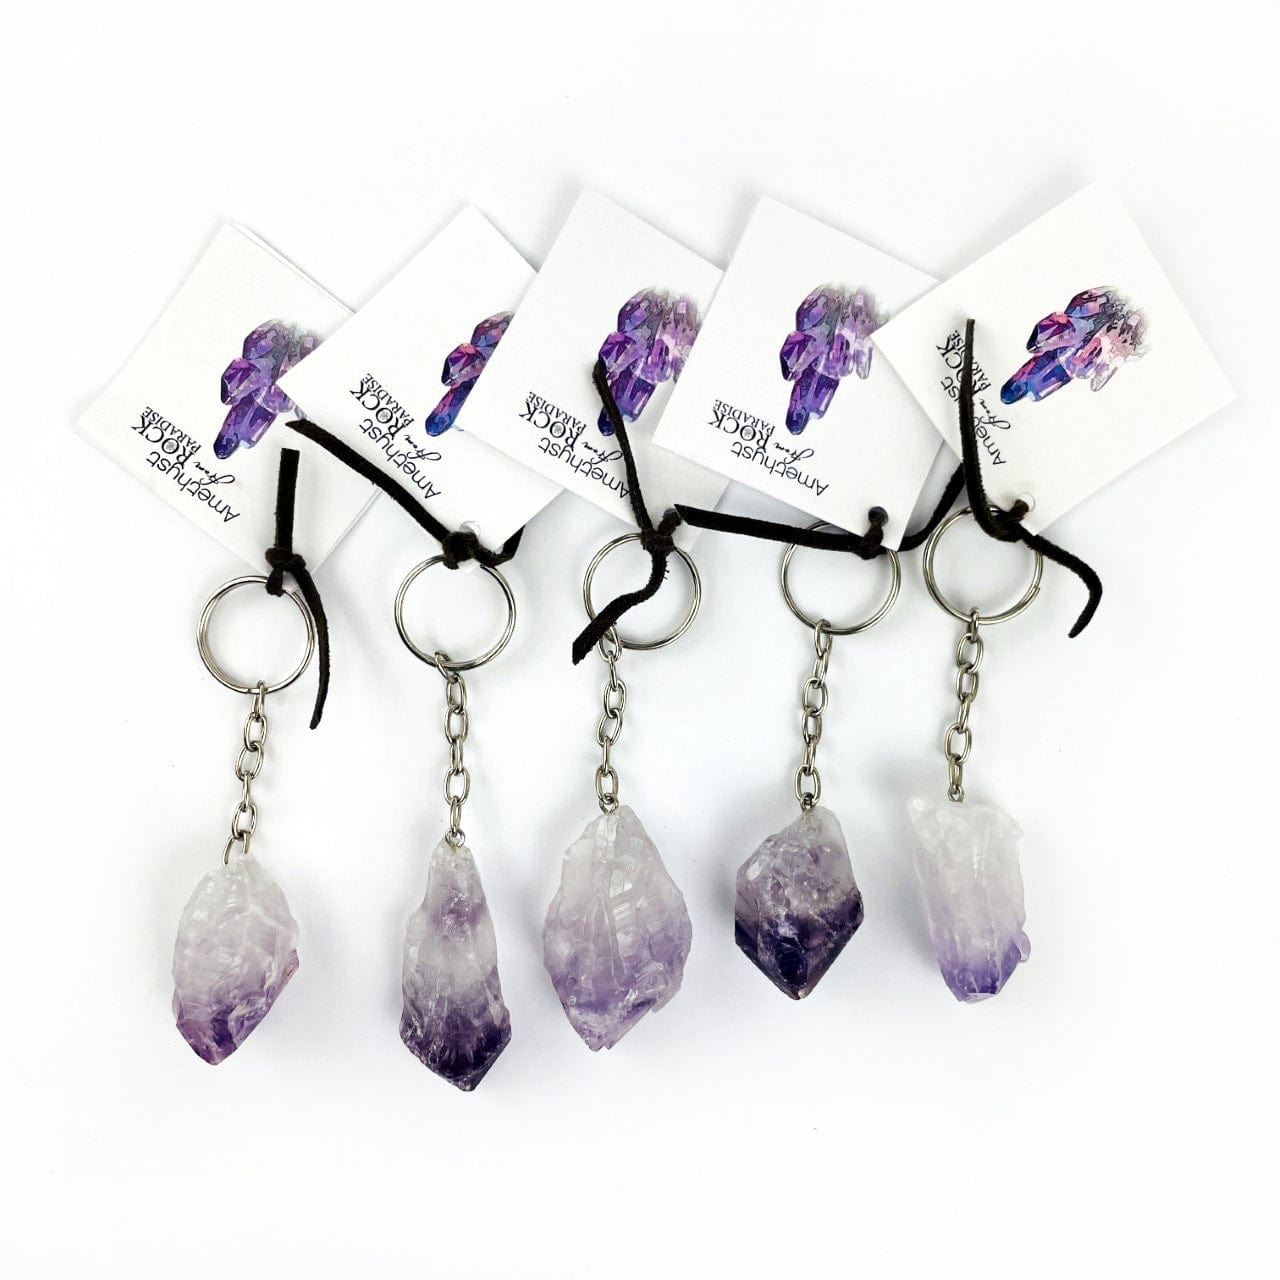 5 Amethyst Keychains with tags on a table showing size and shape variations of this stock.